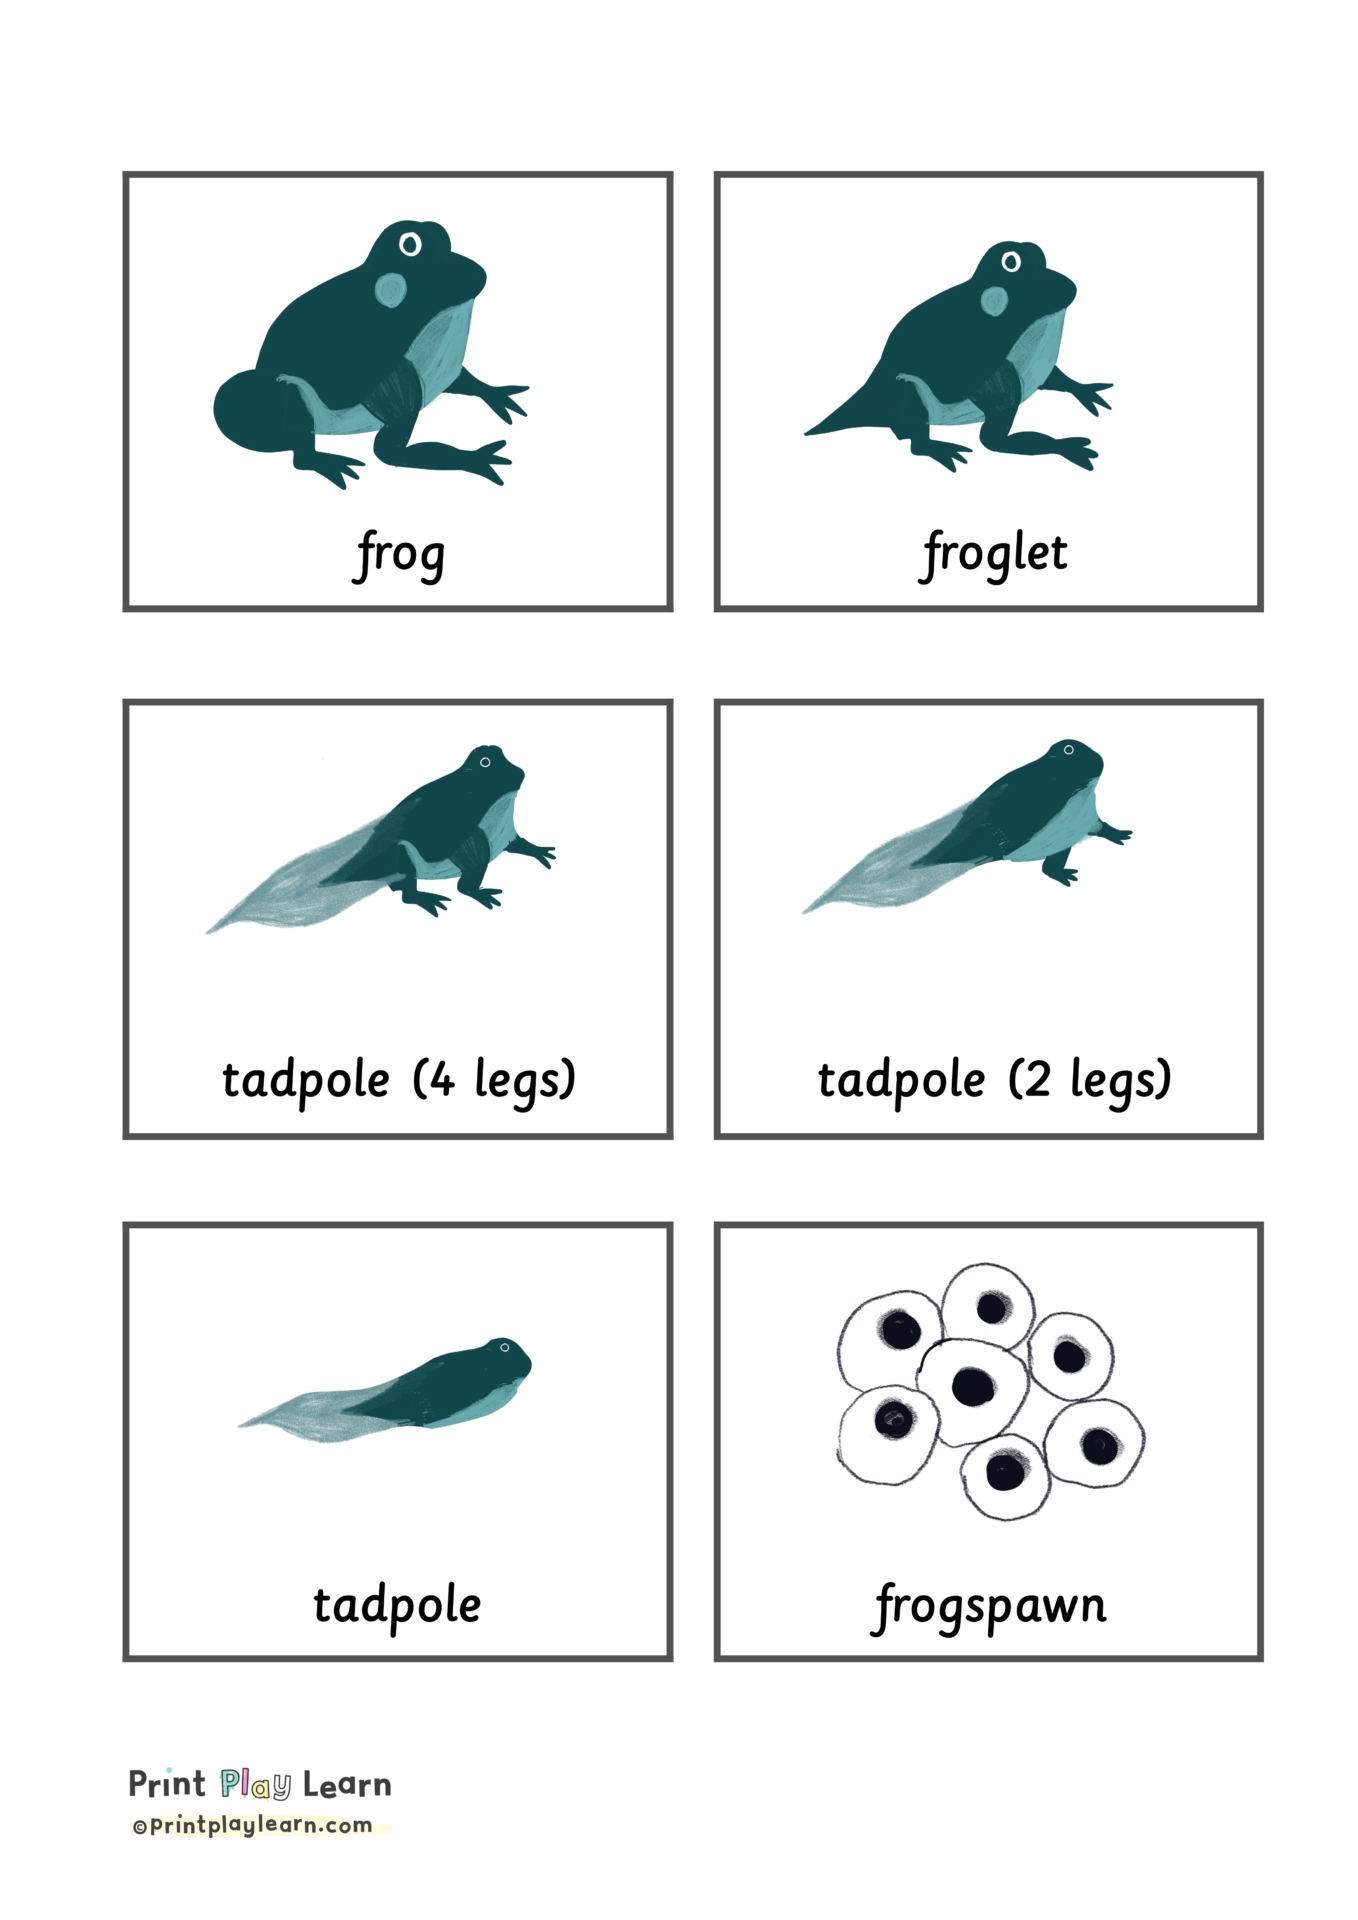 Free Life Cycle Of Frog Printable Cards